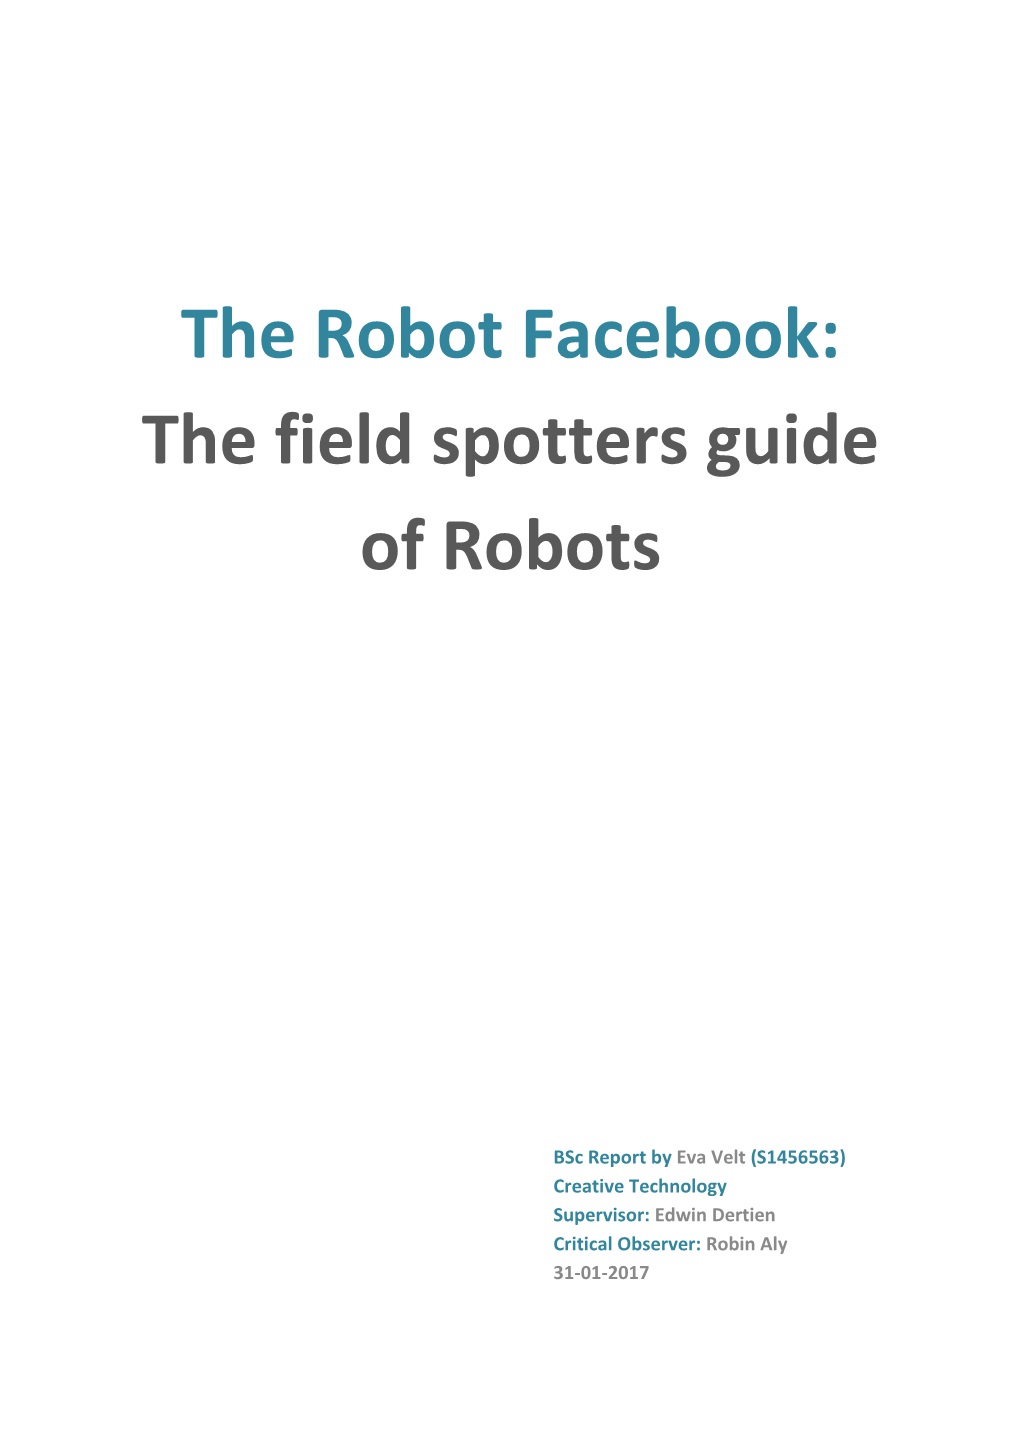 The Robot Facebook: the Field Spotters Guide